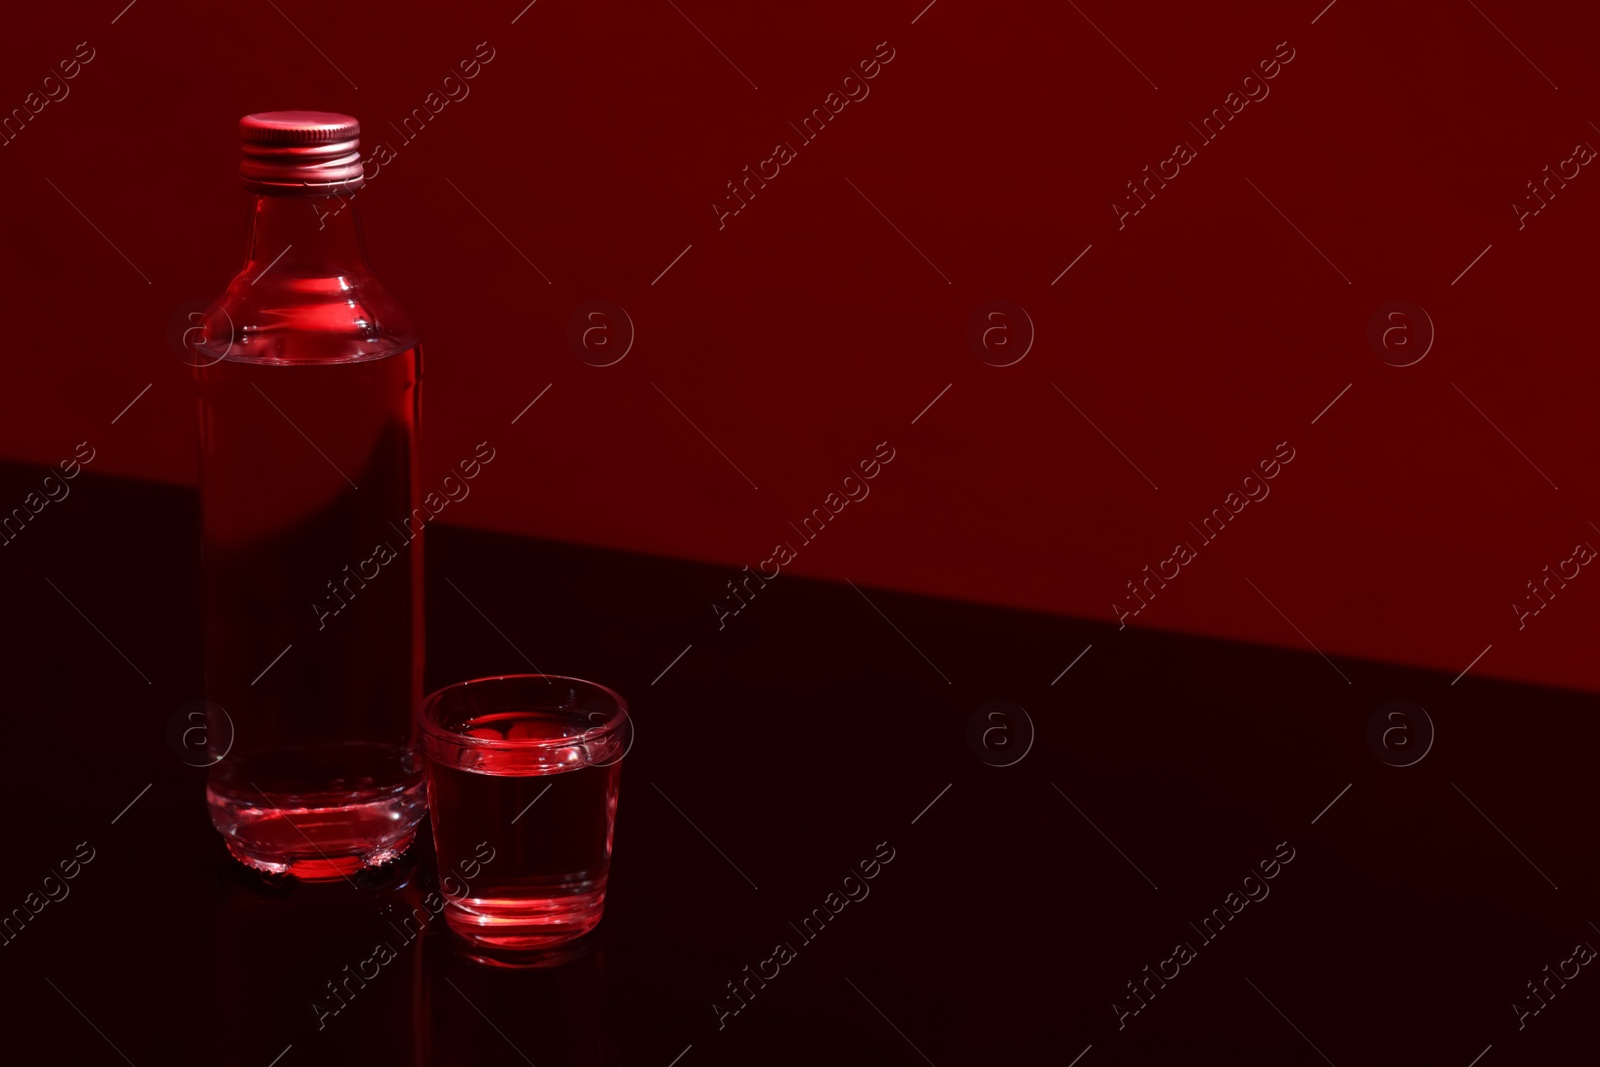 Photo of Bottle and glass with vodka on table against red background, space for text